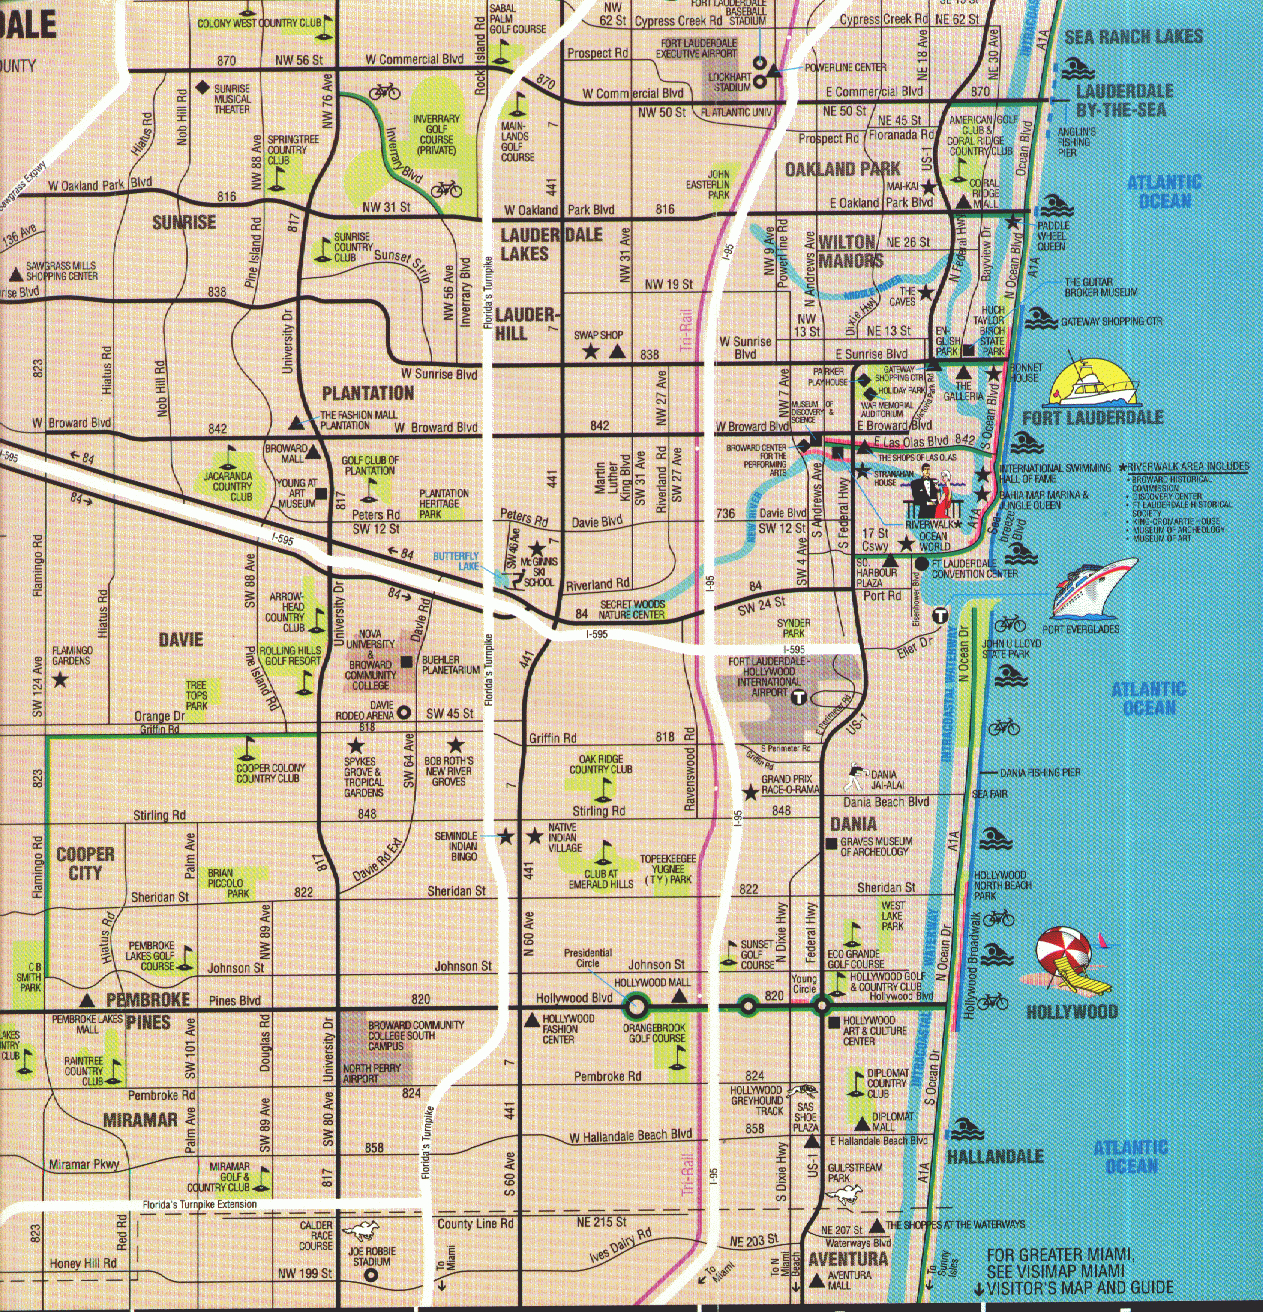 Map Of Ft. Lauderdale, Florida | Vacation Ideas | Pinterest - Where Is Fort Lauderdale Florida On The Map